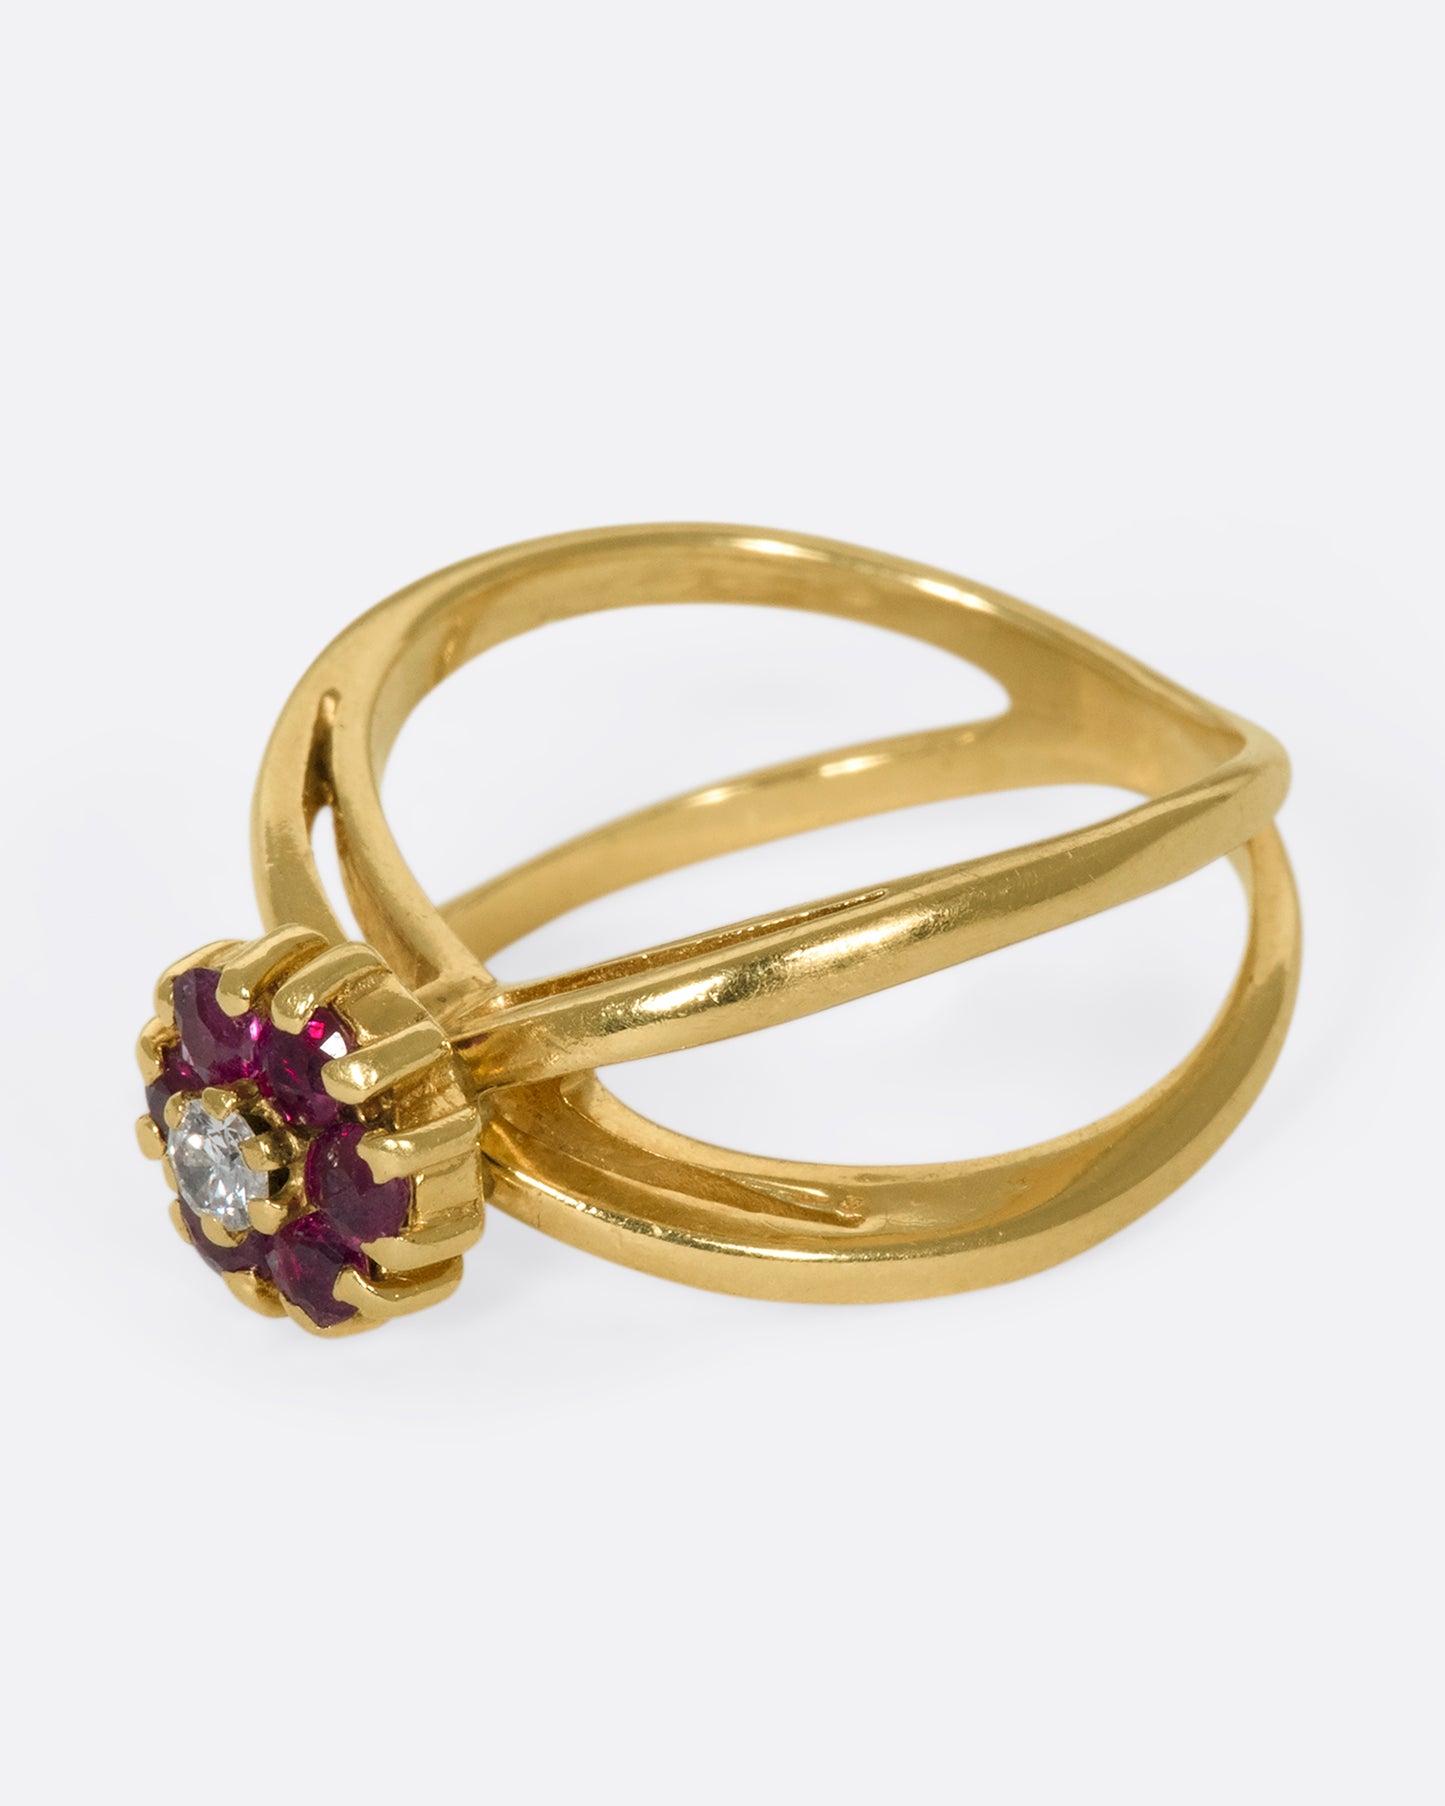 A left side view of a yellow gold double banded ring with a ruby and diamond flower in the center.